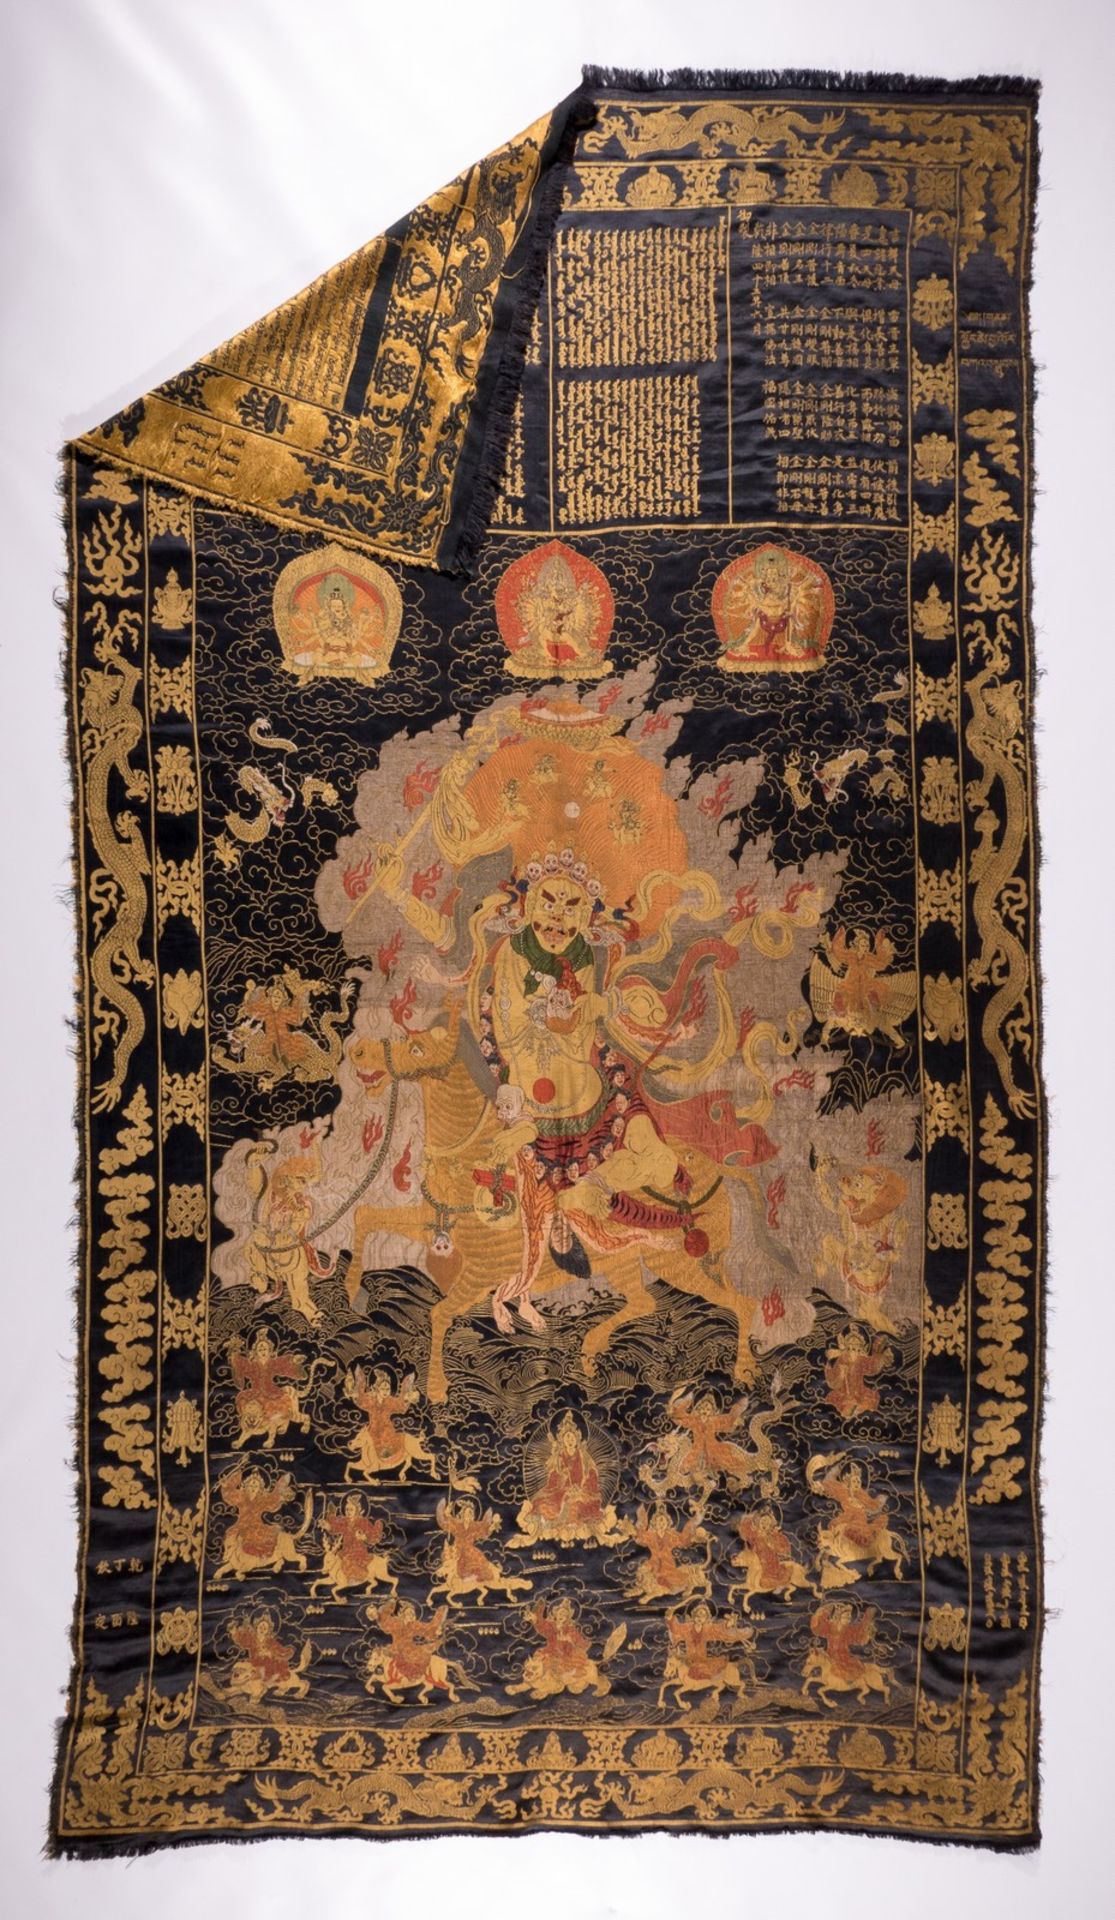 An extraordinary Chinese silk tapestry depicting scenes of a god, dragons and auspicious symbols - Image 2 of 14